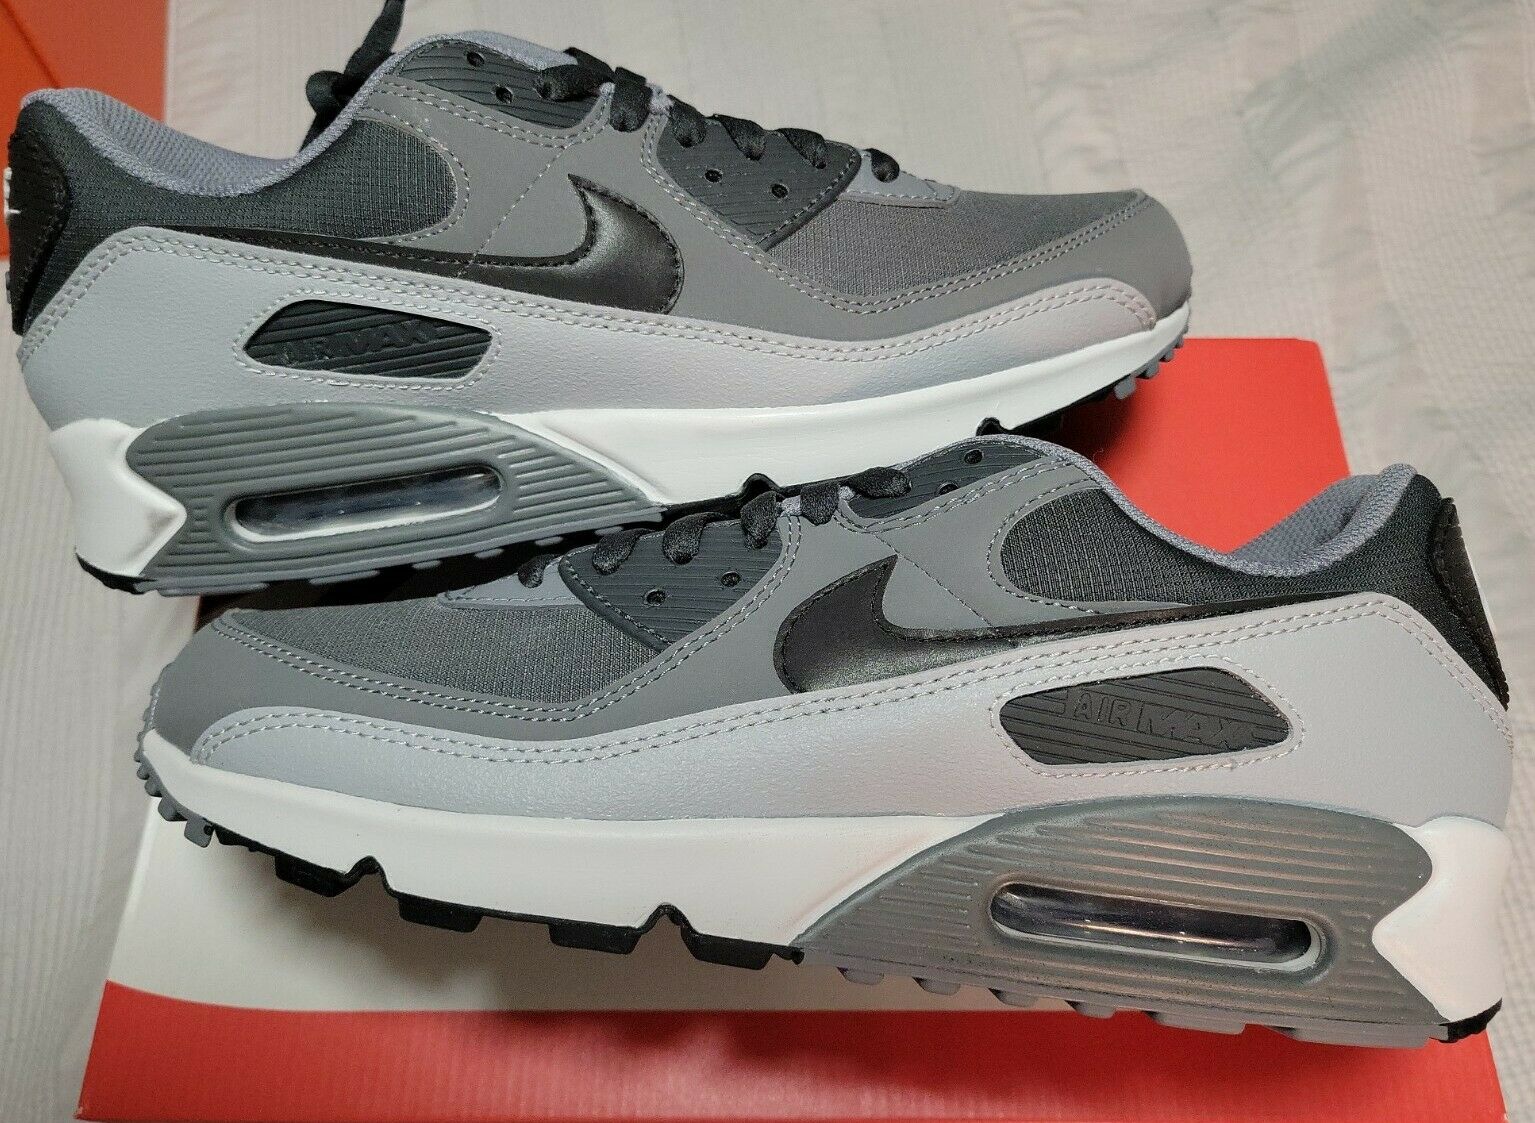 New Nike Air Max 90 Shoes Anthracite Black Gray DC9388-003 Men's Size 11